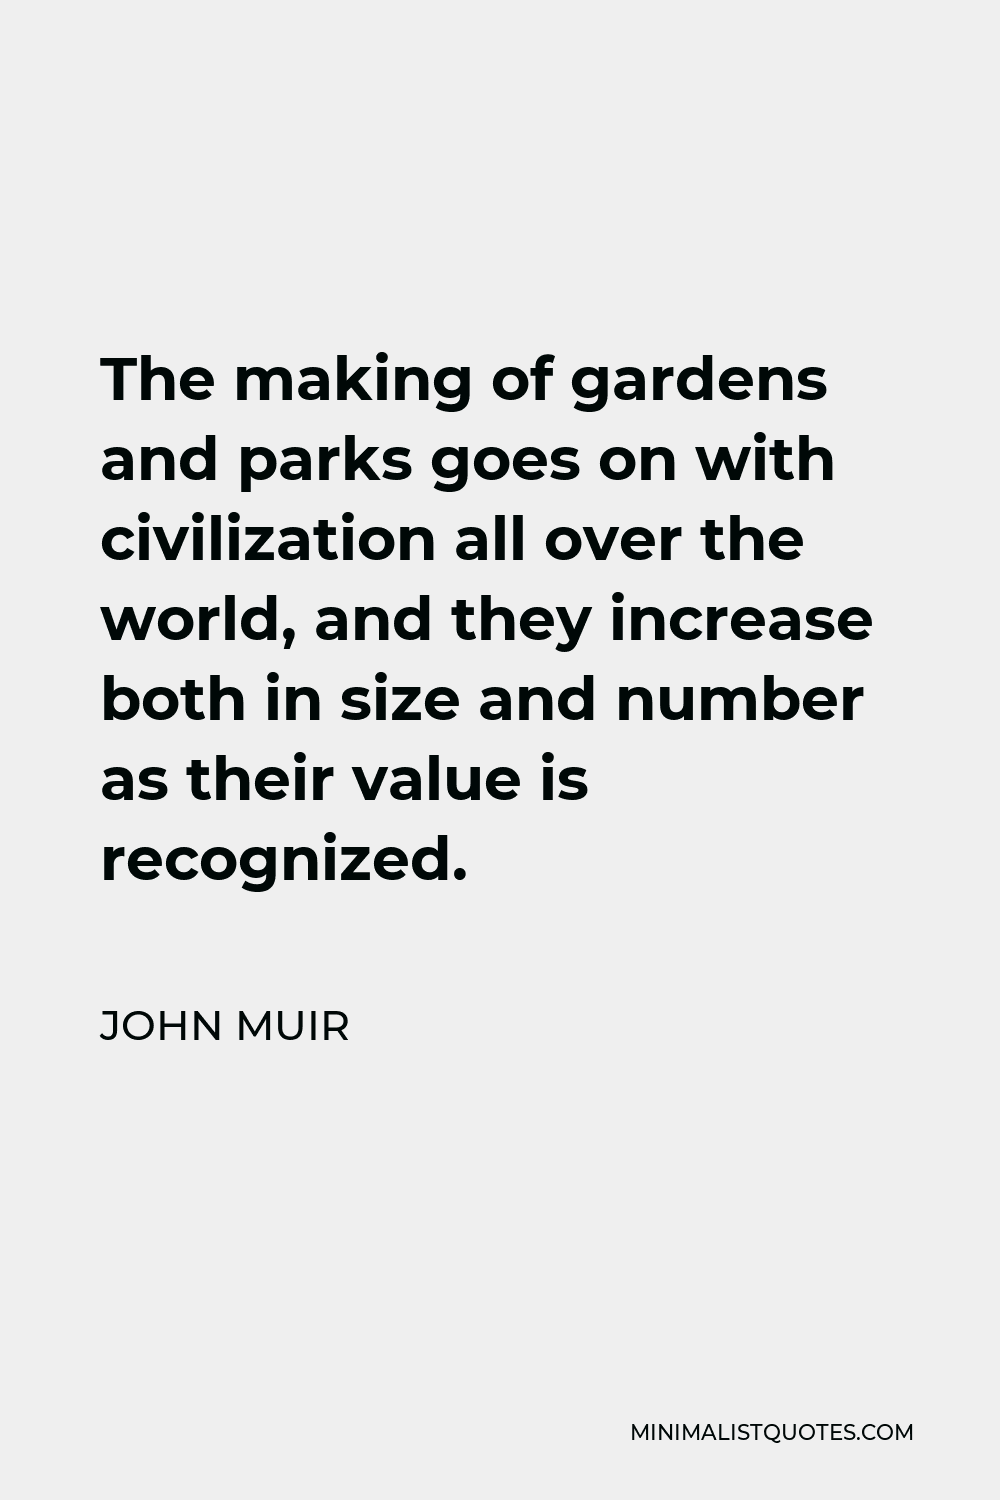 John Muir Quote - The making of gardens and parks goes on with civilization all over the world, and they increase both in size and number as their value is recognized.